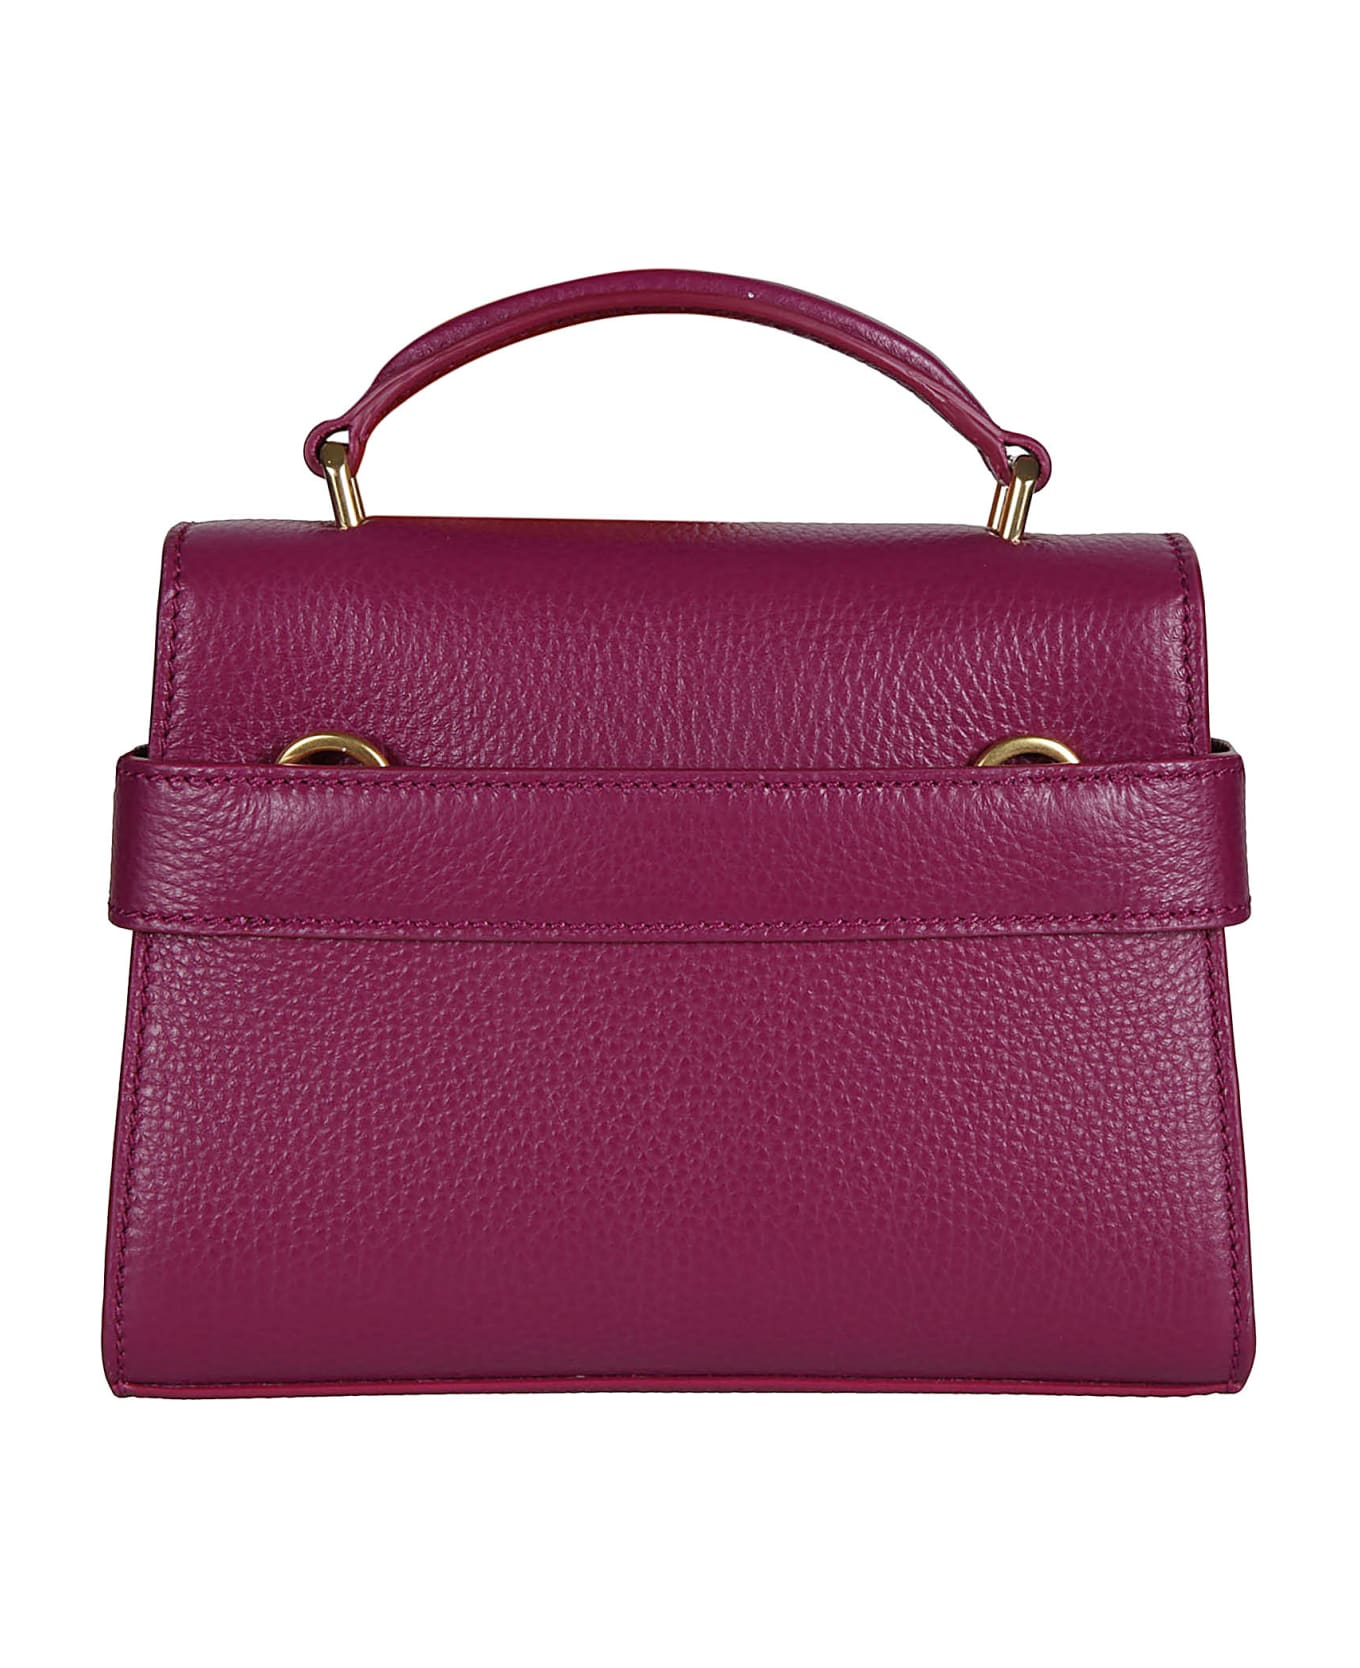 Bally Envelope Snap Tote - Red